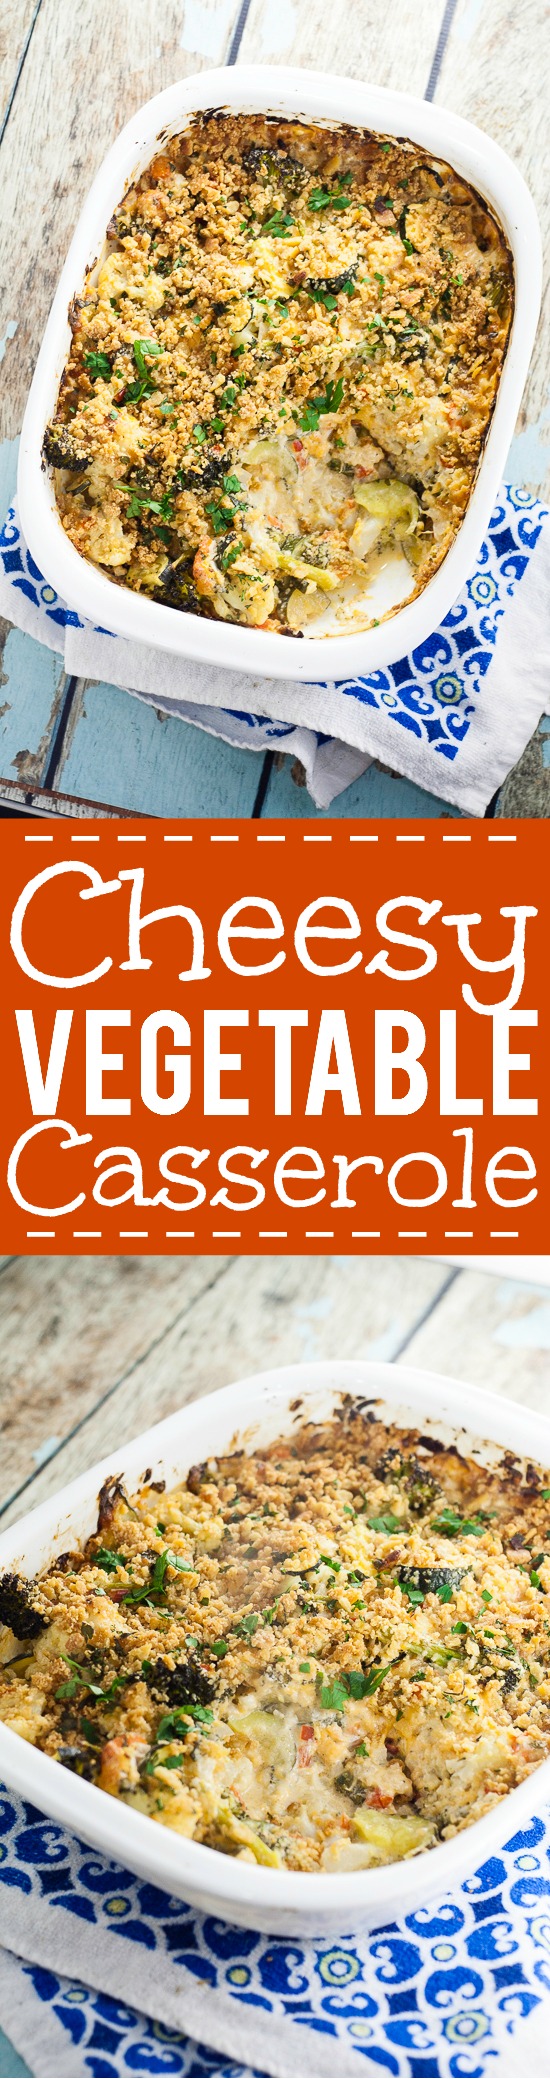 Cheesy Vegetable Casserole Recipe - Whether you use fresh or frozen vegetables, this Cheesy Vegetable Casserole recipe is perfect for potlucks and using up your favorite vegetables. I know what I'm bringing to our next potluck!